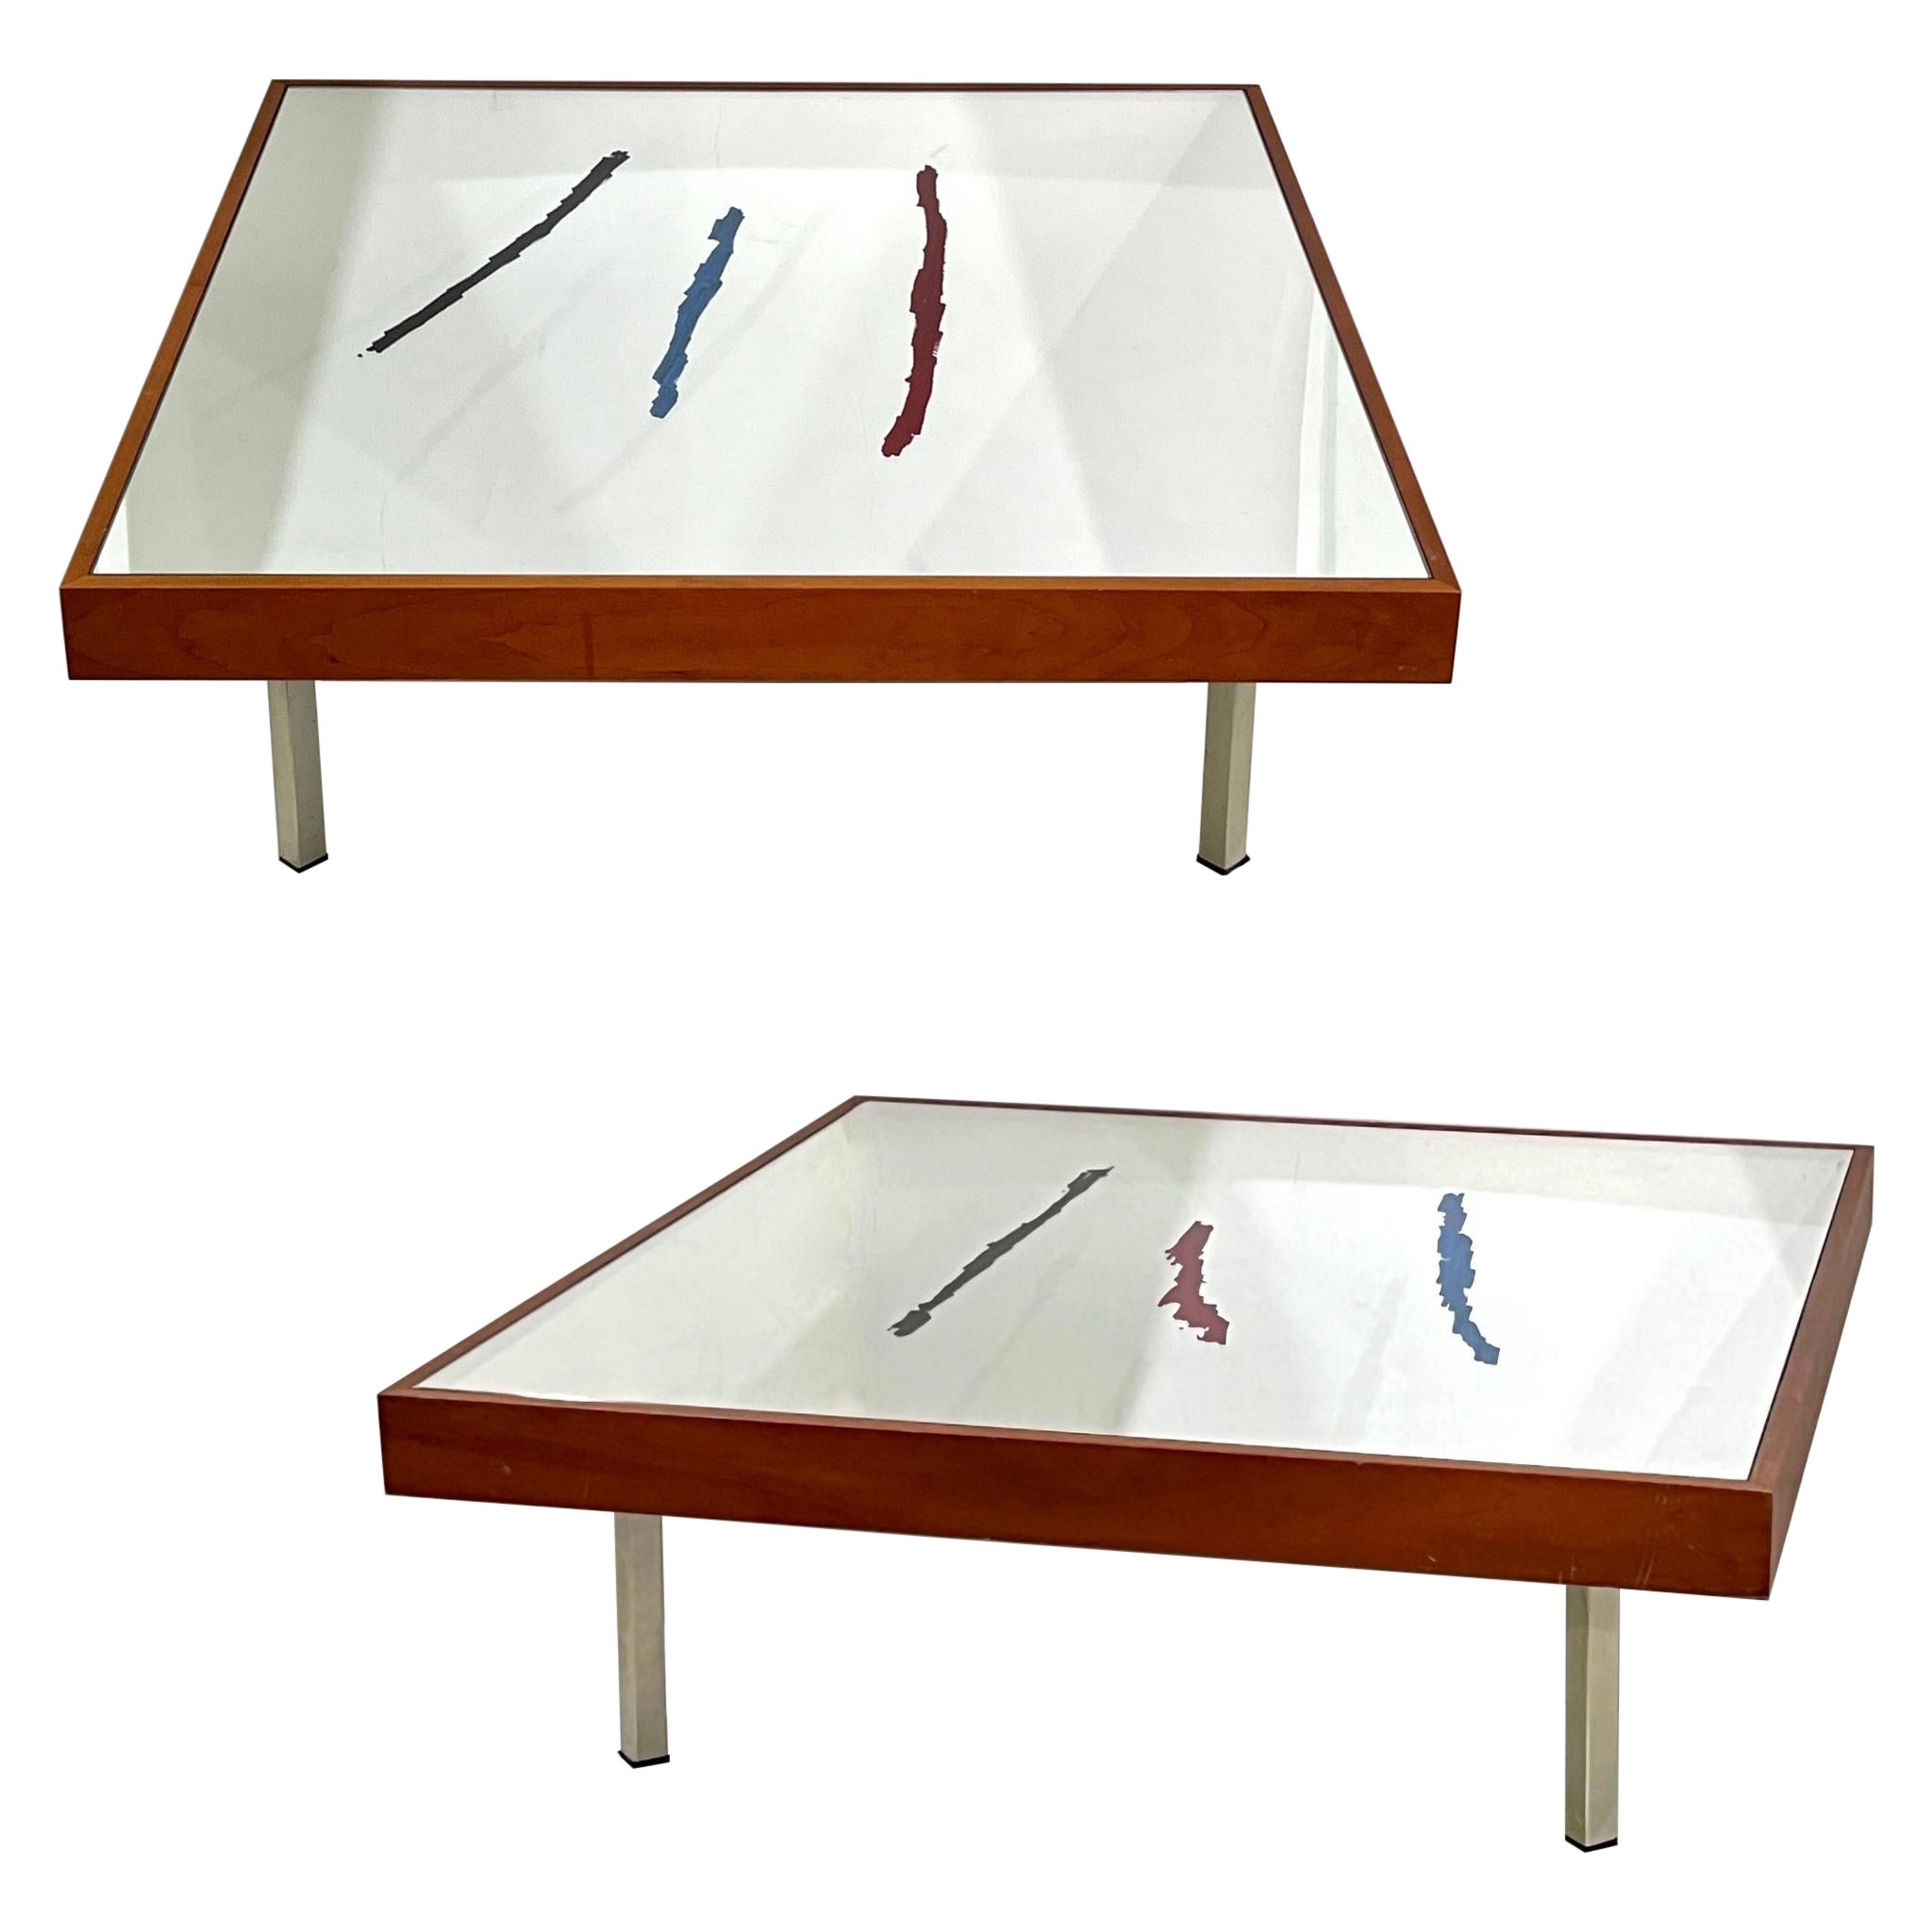 1970s Italian Post-Modern Pair of Mirrored Cherry Wood Eglomise Coffee Tables  For Sale